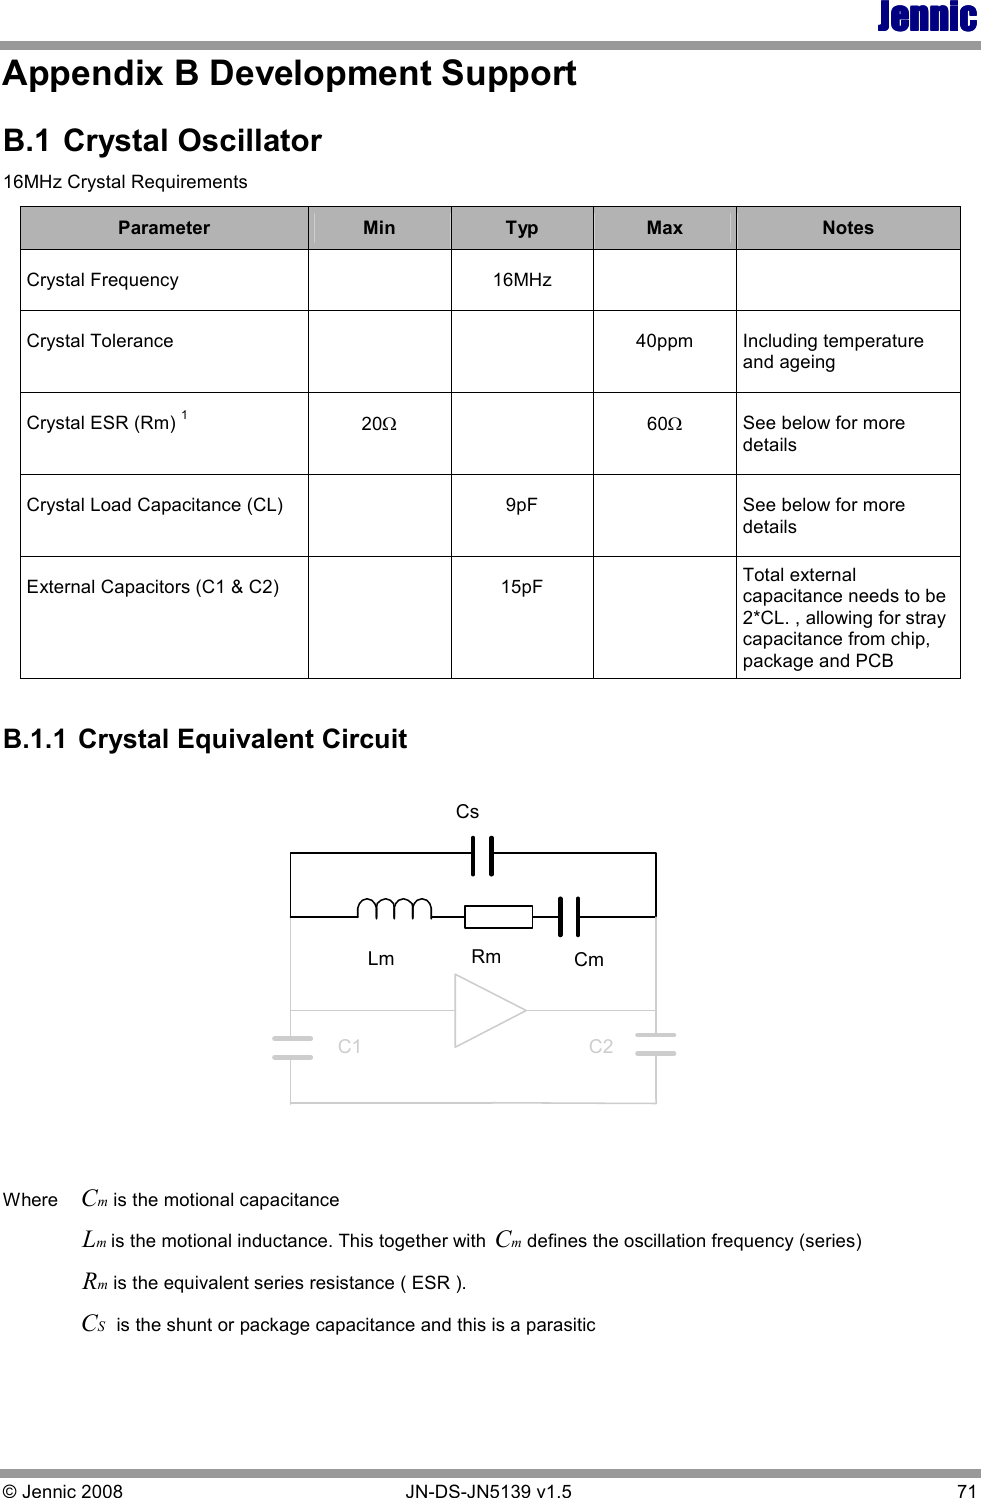 JennicJennicJennicJennic © Jennic 2008        JN-DS-JN5139 v1.5  71  Appendix B Development Support B.1  Crystal Oscillator 16MHz Crystal Requirements Parameter  Min  Typ  Max  Notes Crystal Frequency    16MHz     Crystal Tolerance      40ppm  Including temperature and ageing Crystal ESR (Rm) 1 20Ω  60Ω See below for more details Crystal Load Capacitance (CL)    9pF    See below for more details External Capacitors (C1 &amp; C2)     15pF    Total external capacitance needs to be 2*CL. , allowing for stray capacitance from chip, package and PCB   B.1.1  Crystal Equivalent Circuit  CsLm CmRmC2C1  Where  mCis the motional capacitance   mLis the motional inductance. This together with mCdefines the oscillation frequency (series)  mRis the equivalent series resistance ( ESR ).   SC is the shunt or package capacitance and this is a parasitic  